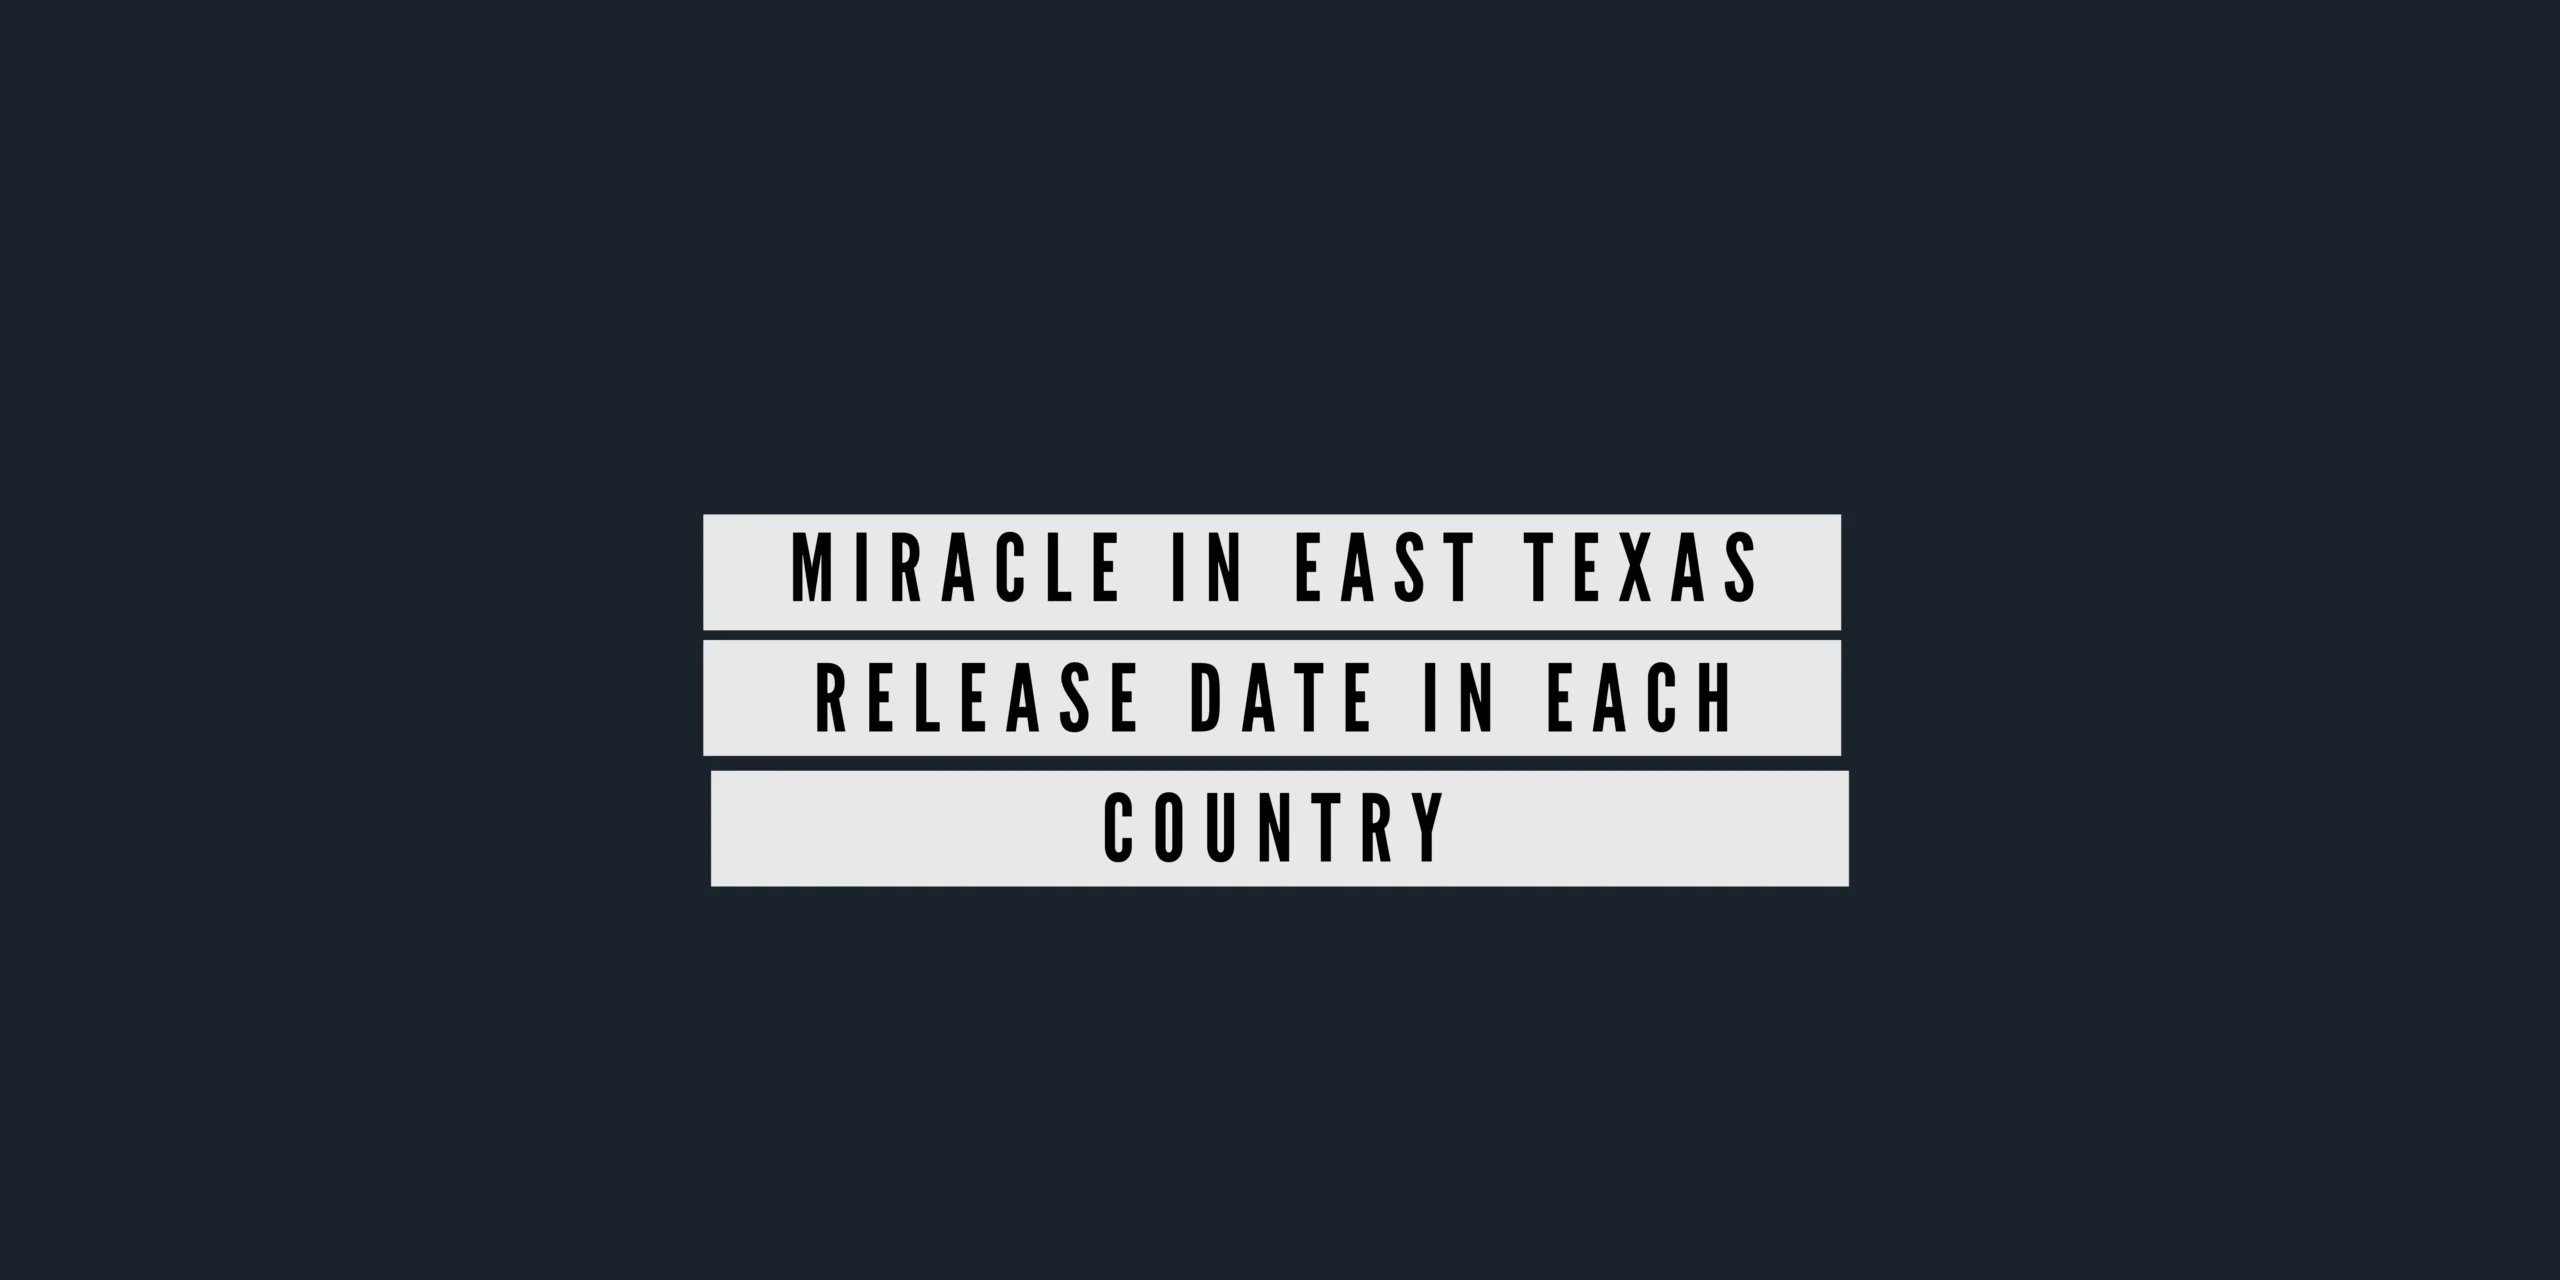 Miracle in East Texas Release Date In Each Country scaled